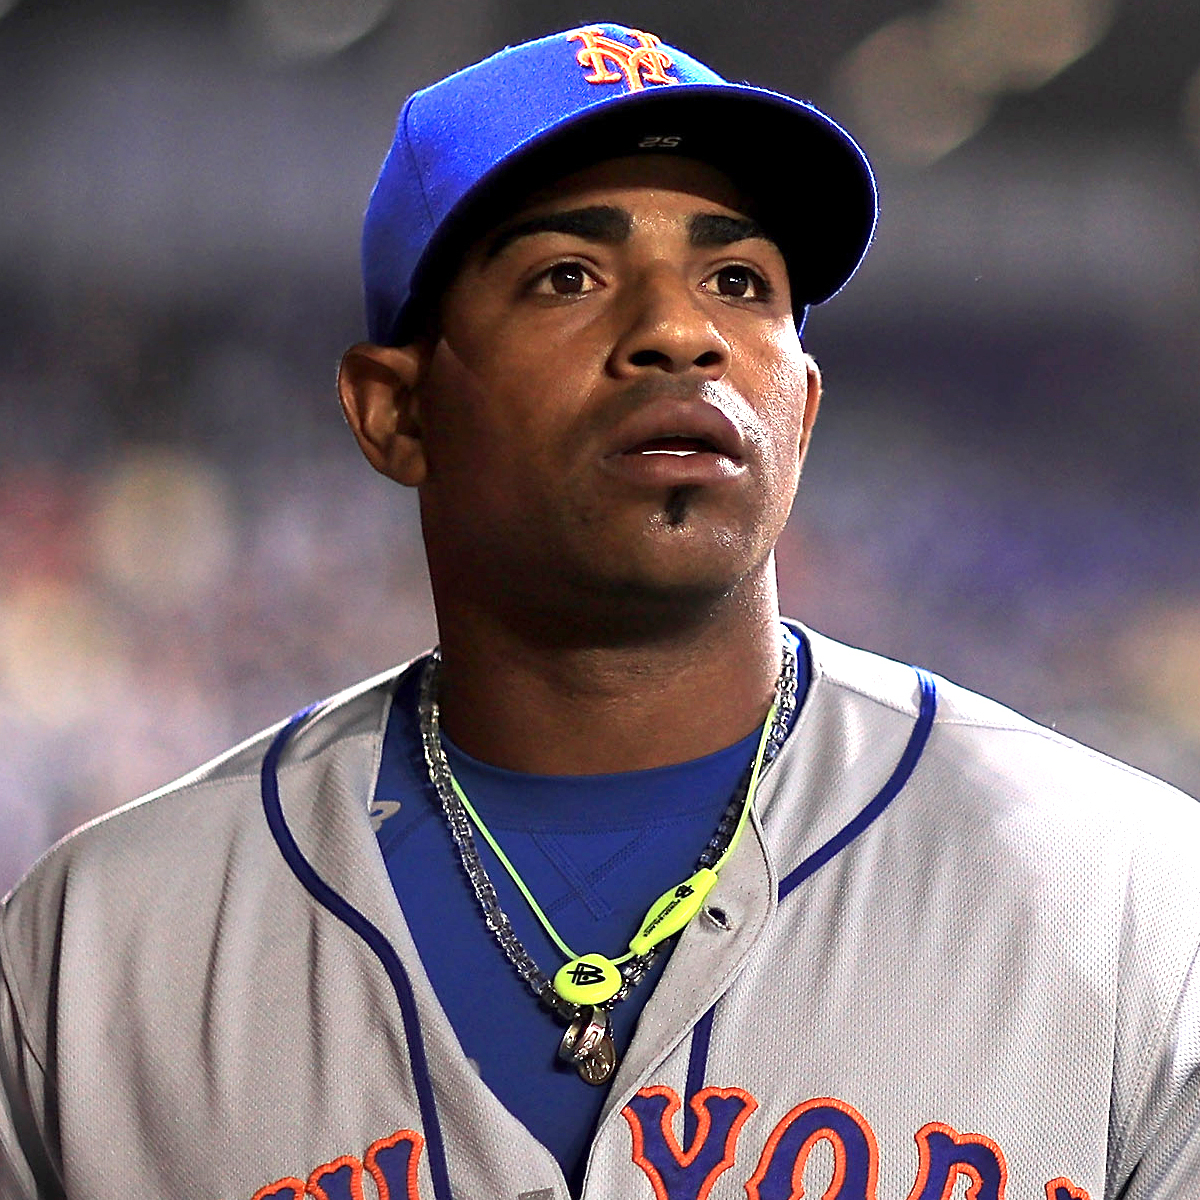 New York Mets Say Yoenis Céspedes Has Opted Out Of the 2020 Season